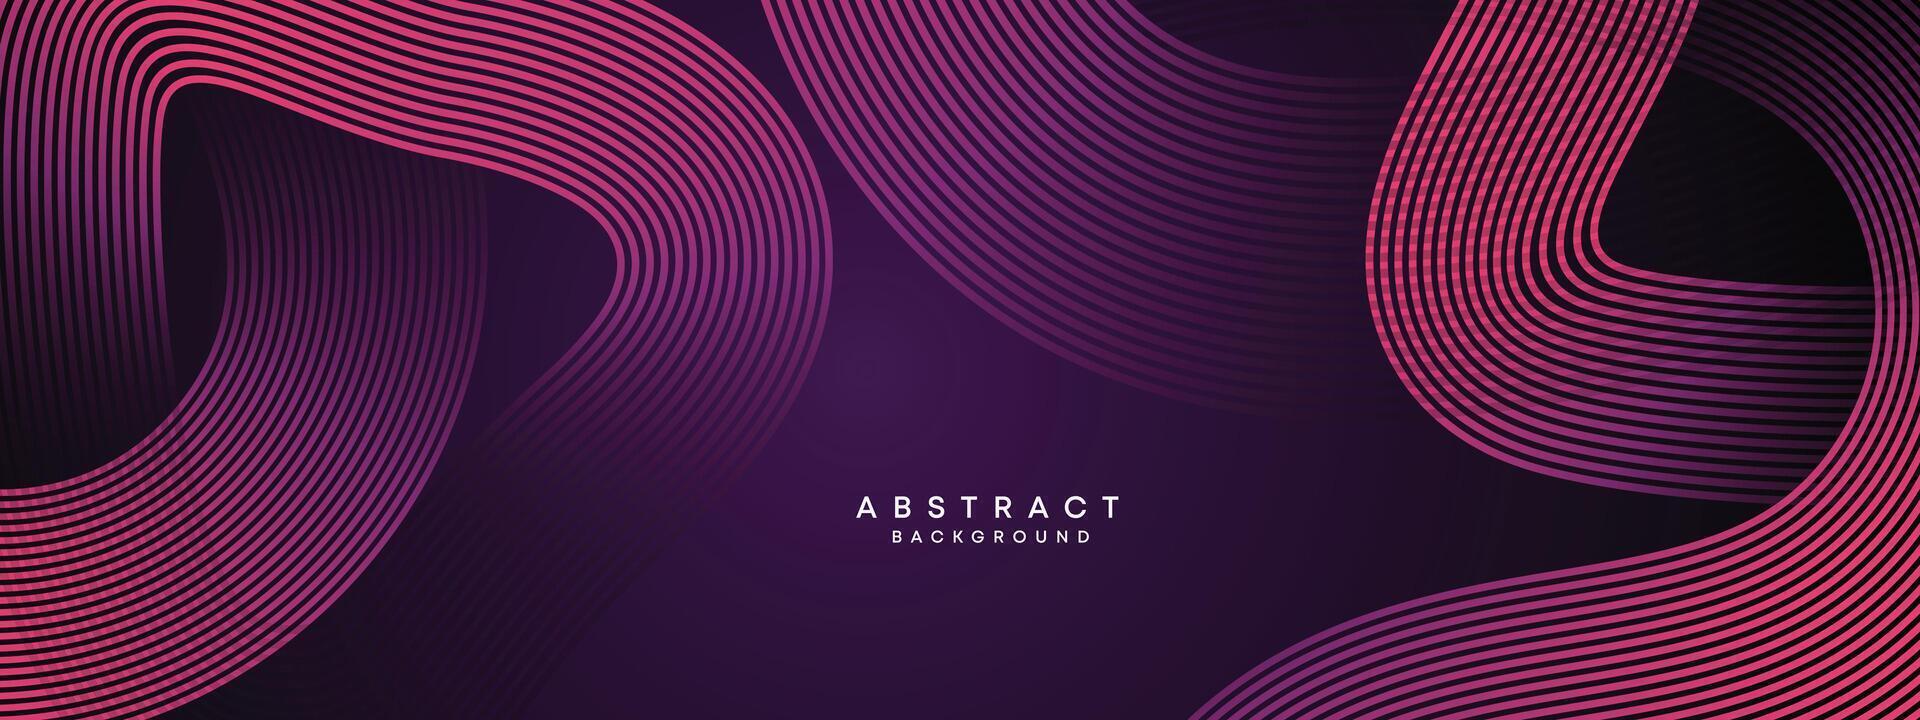 Abstract Dark Purple and Pink Waving circles lines Technology Background. gradient with glowing lines shiny geometric shape and diagonal, for brochure, cover, poster, banner, website, header vector